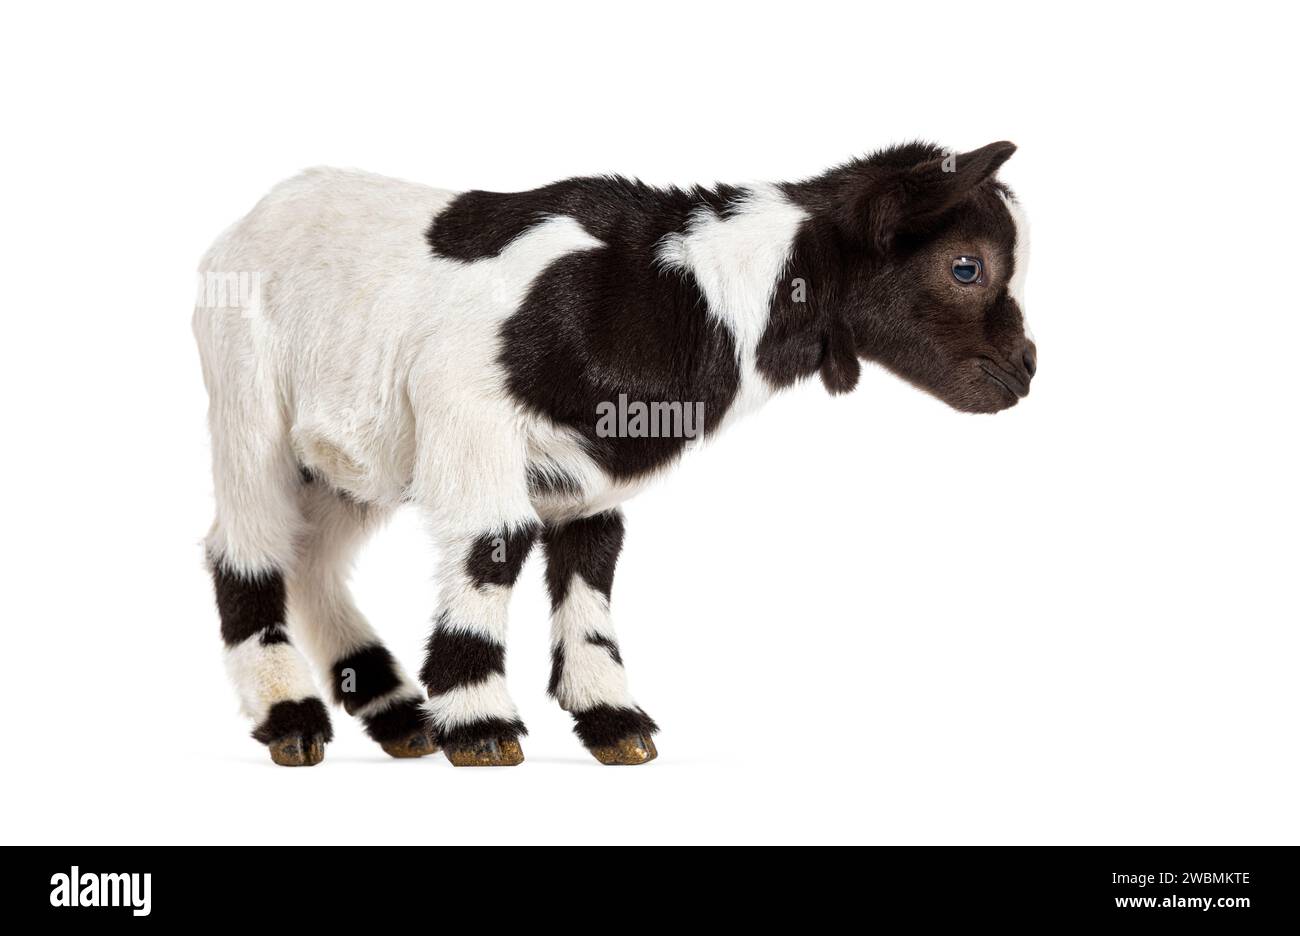 Black and white kid of a Tibetan Pigmy Goat, isolated on white Stock Photo